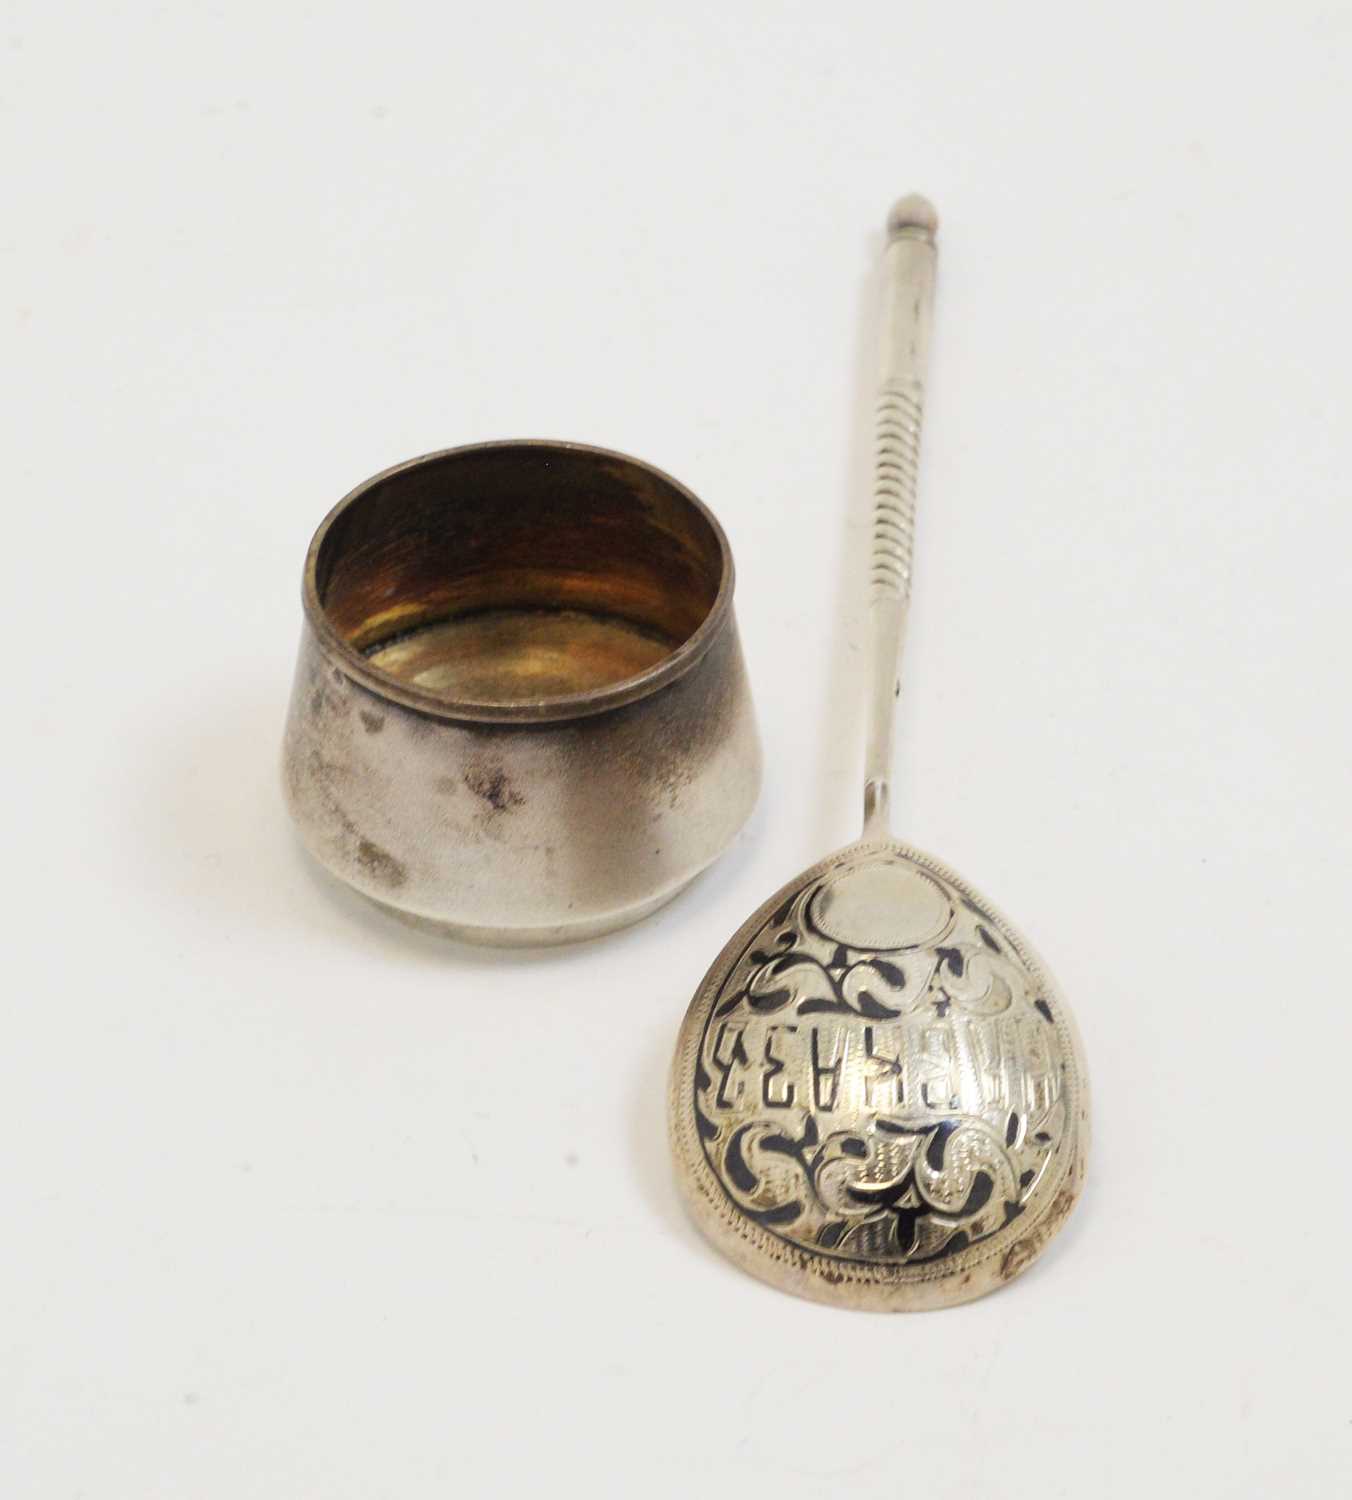 Lot 179 - Russian silver spoon and table salt